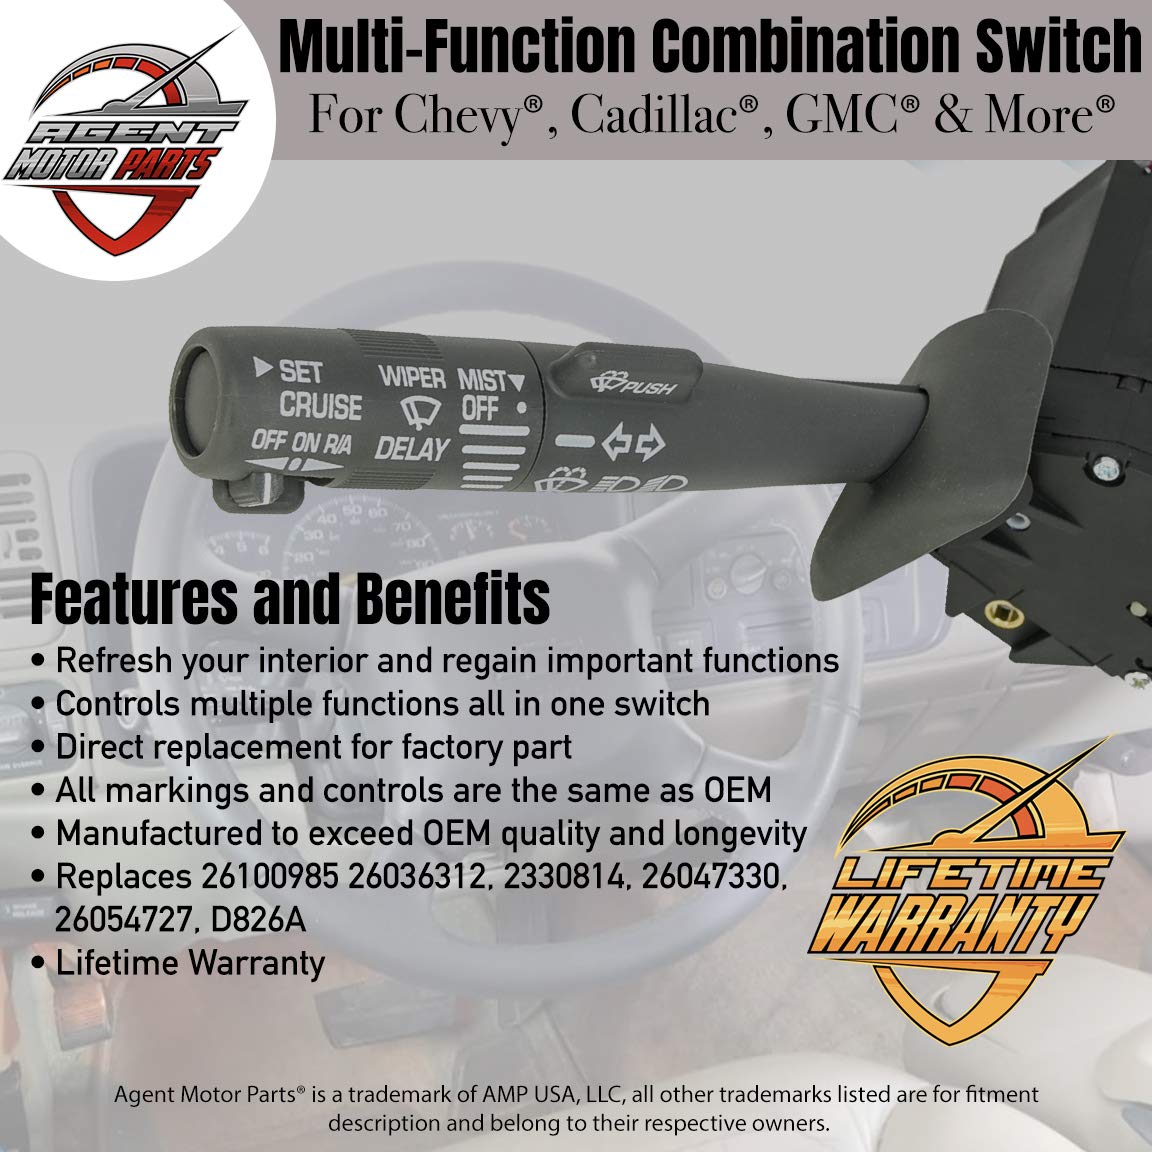 Multi-Function Combination Column Blinker Switch - Replaces# 2330814, –  Agent Motor Parts